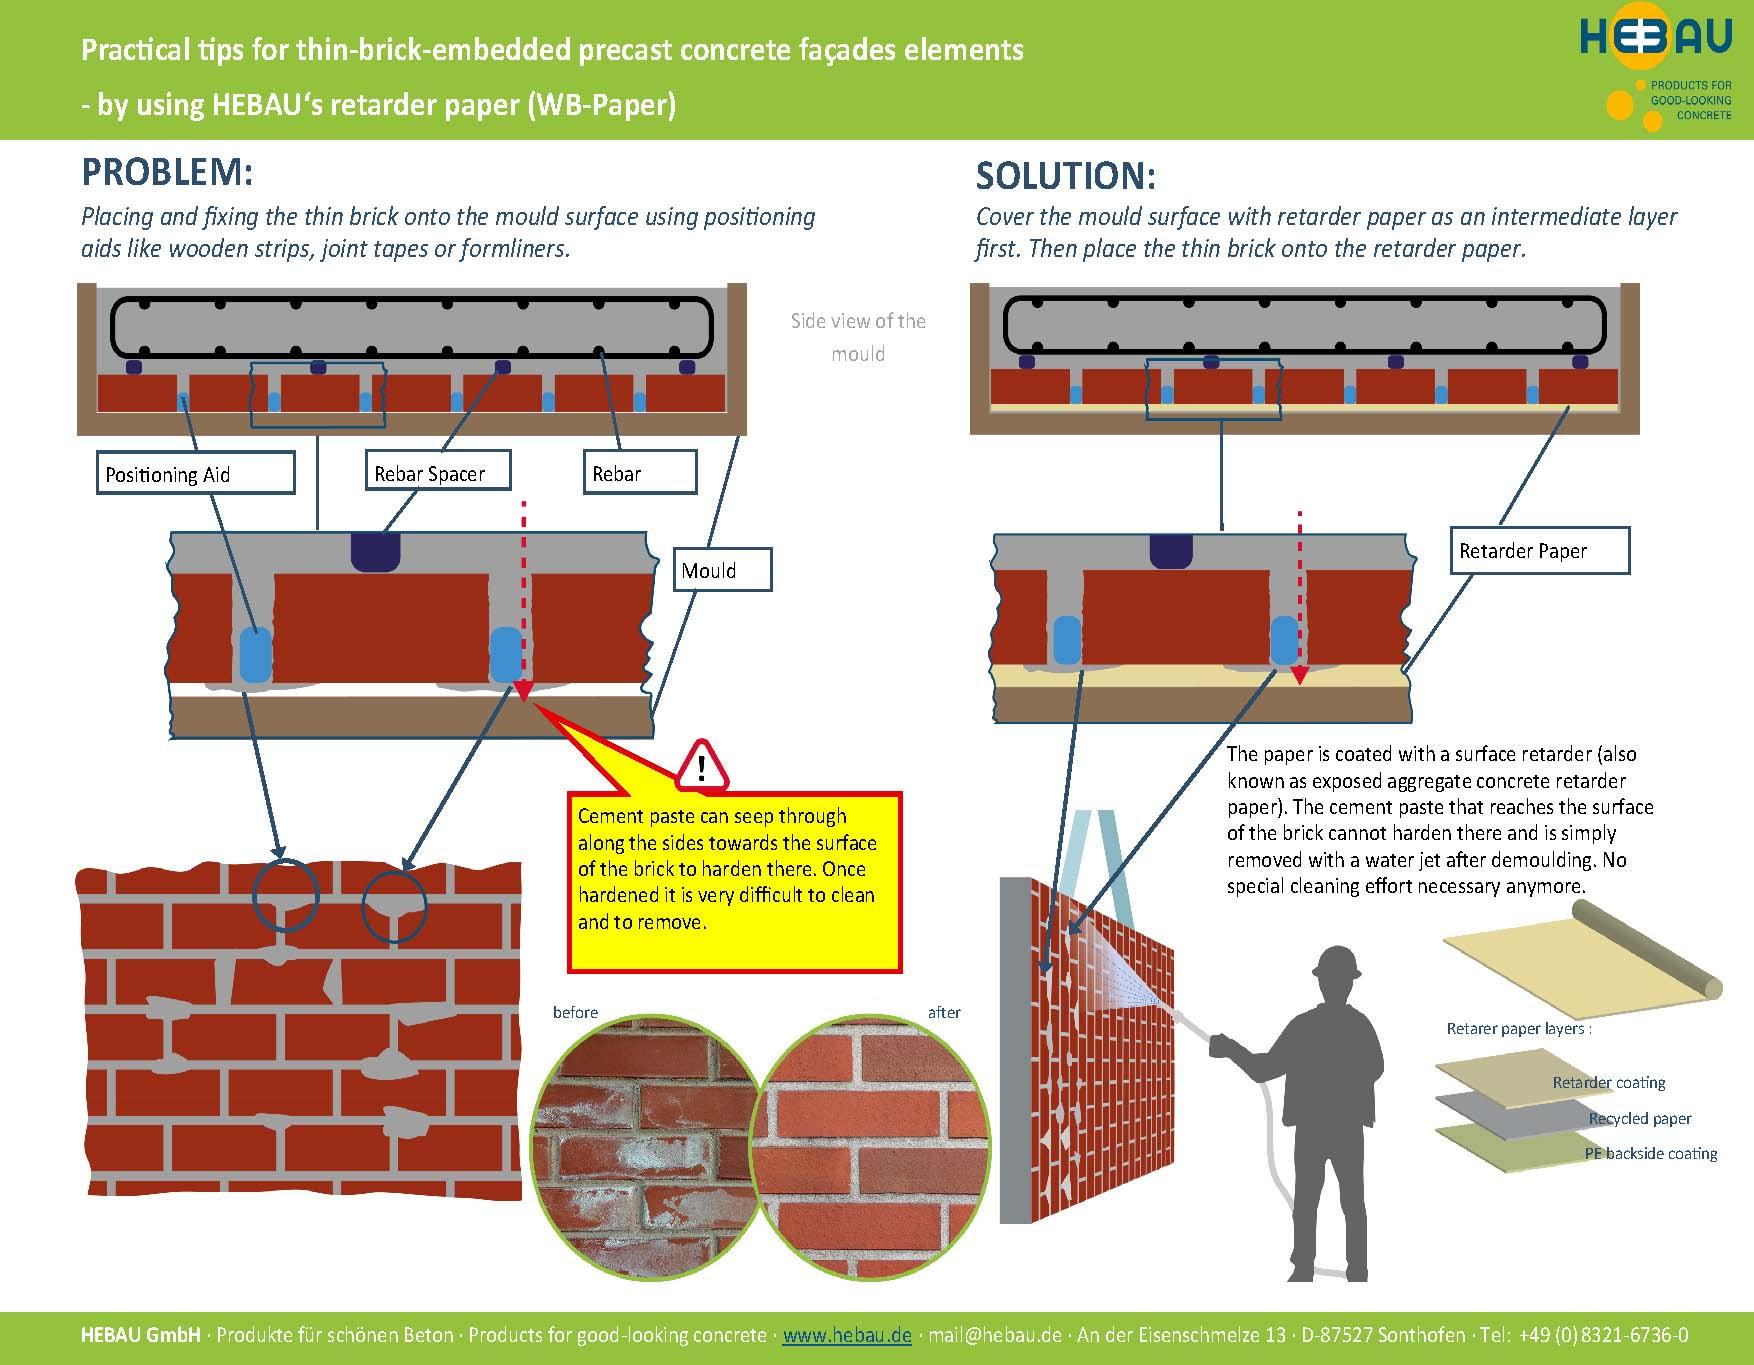 Tips for thin-brick-embedded precast concrete facades elements with retarder paper